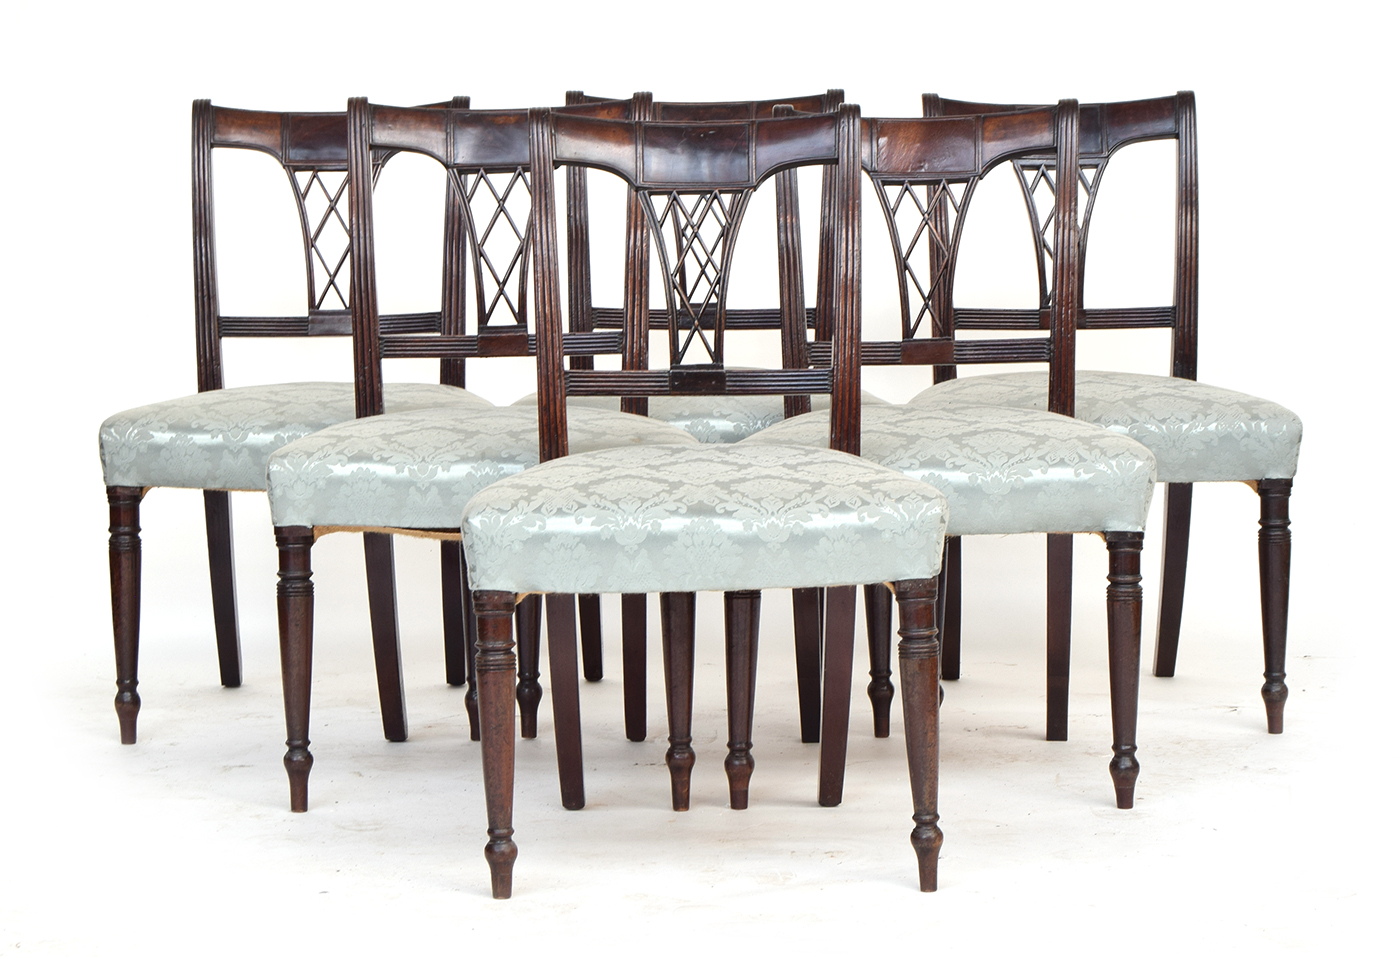 A set of six Regency dining chairs, with lattice backs above stuffover seats, on turned legs